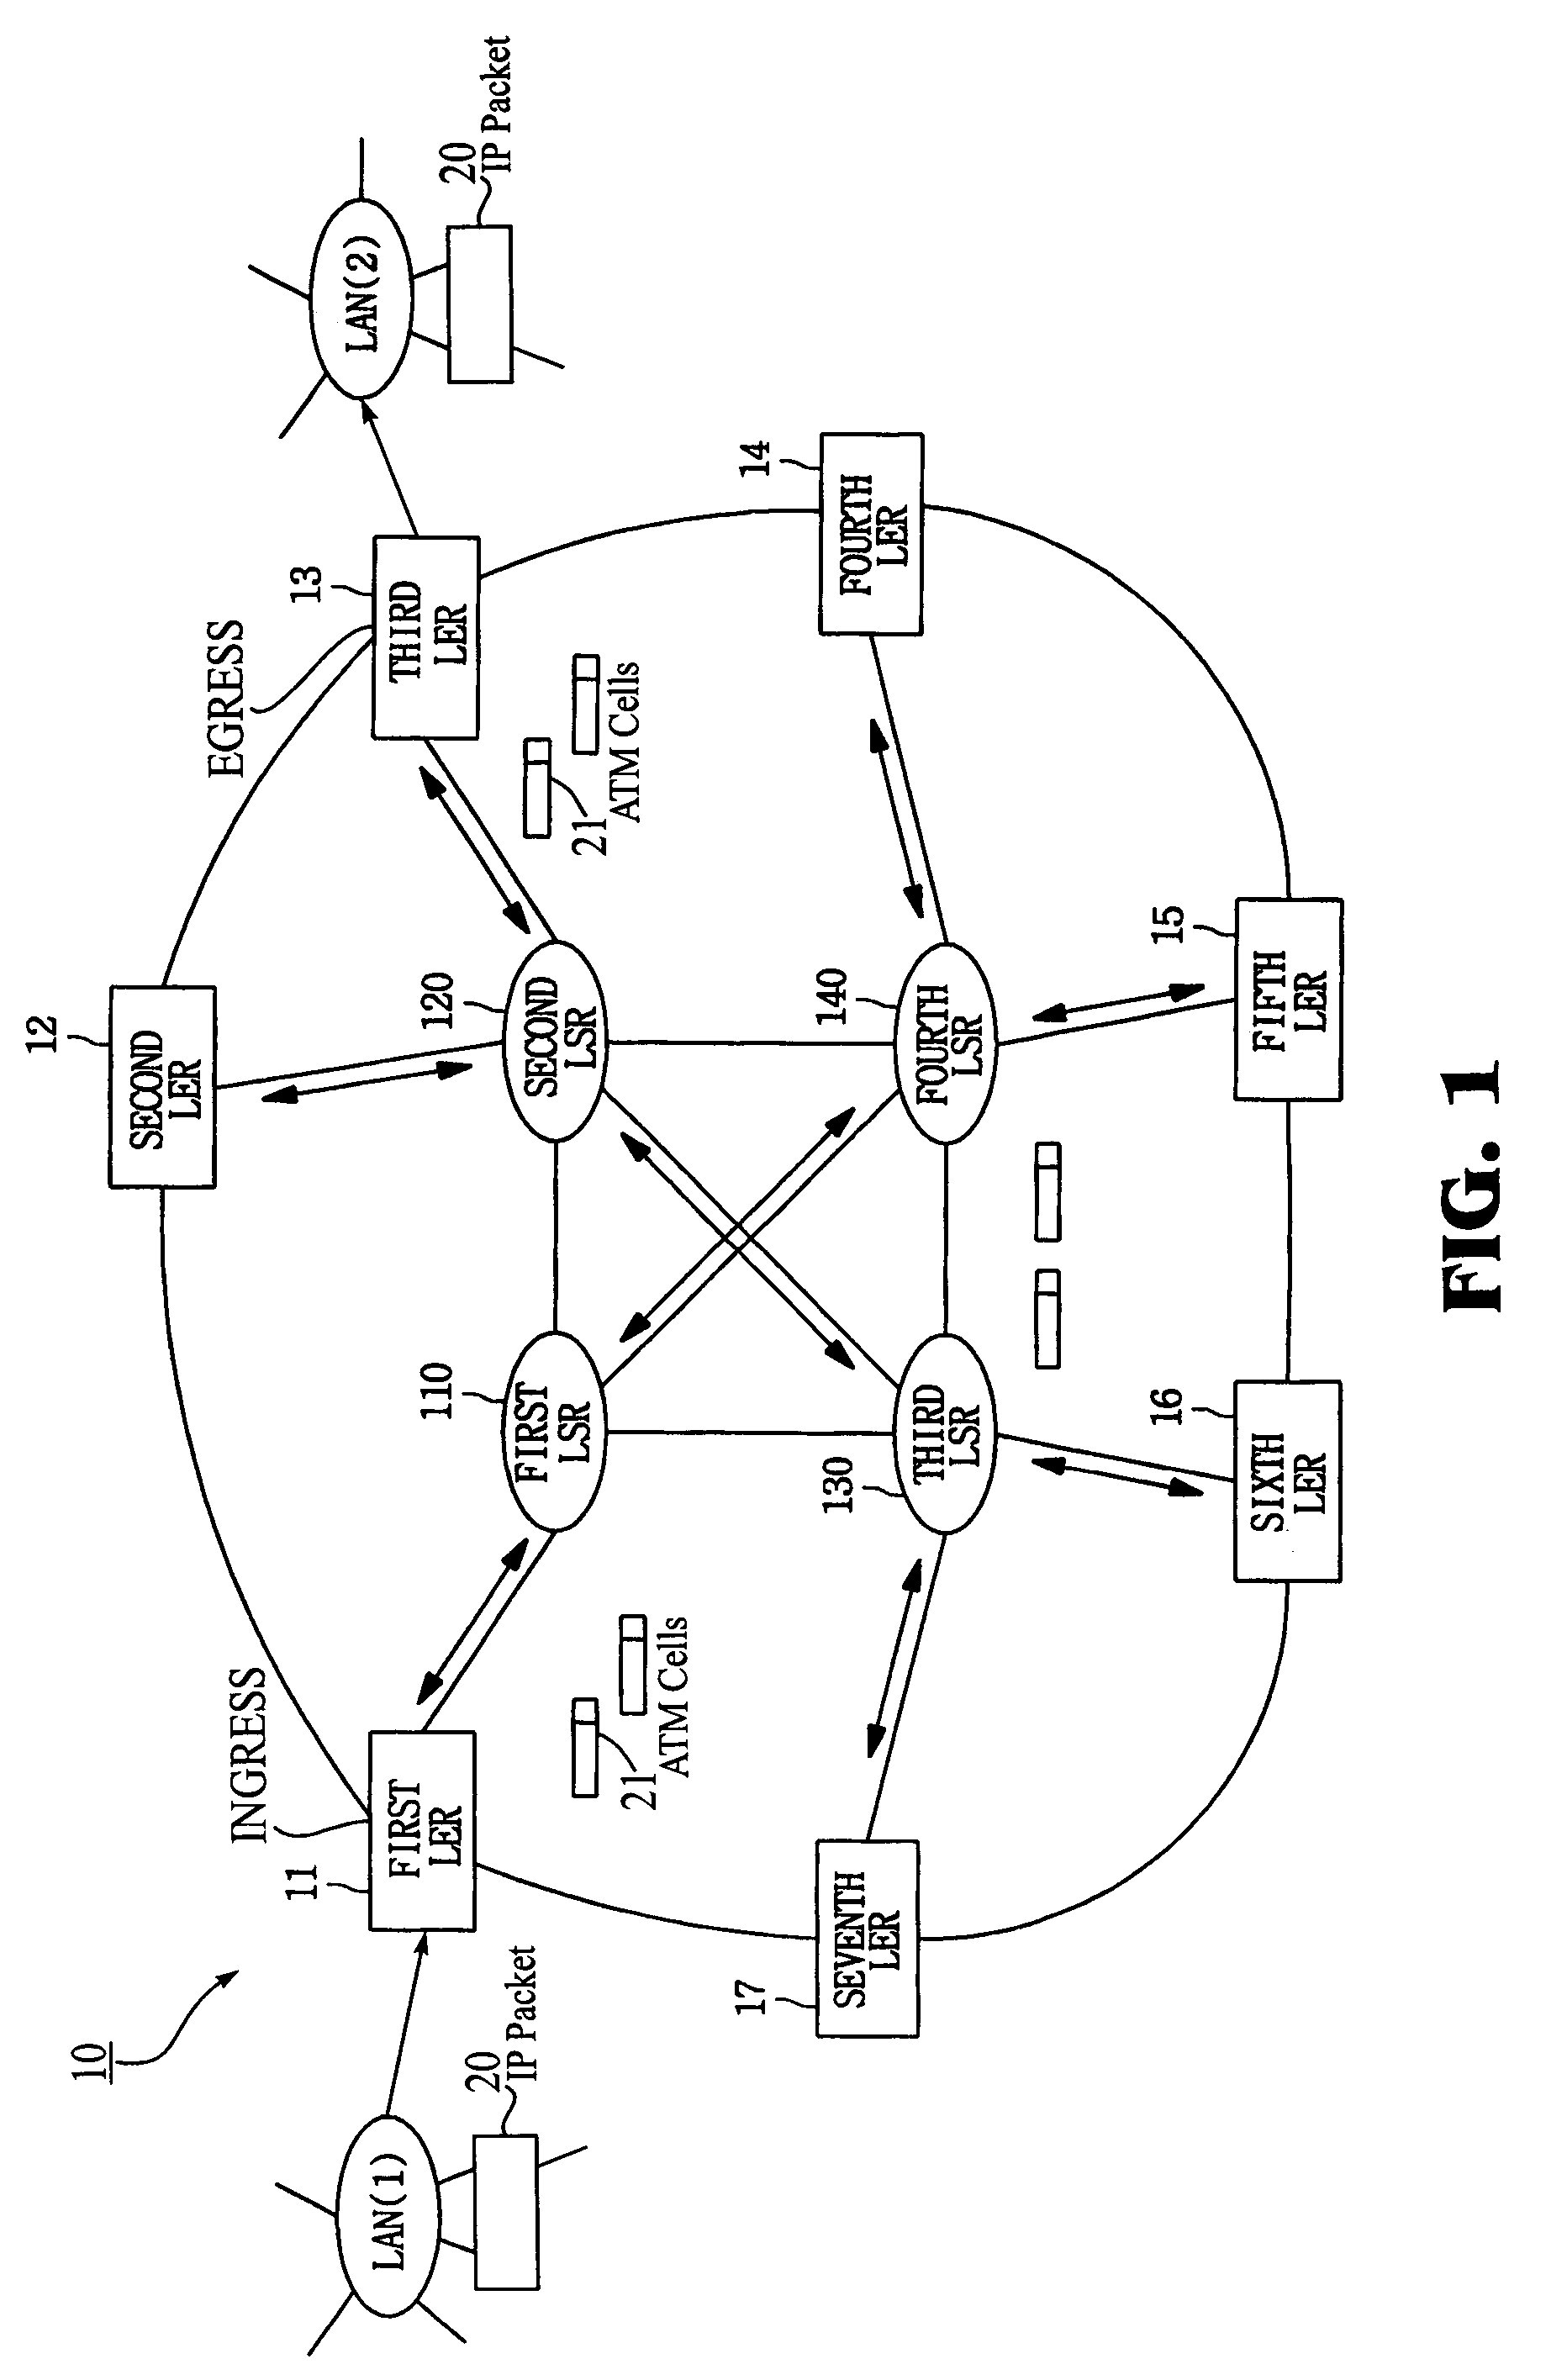 Label switching router having internal channel share function over ATM, and method for sharing internal channel using the same